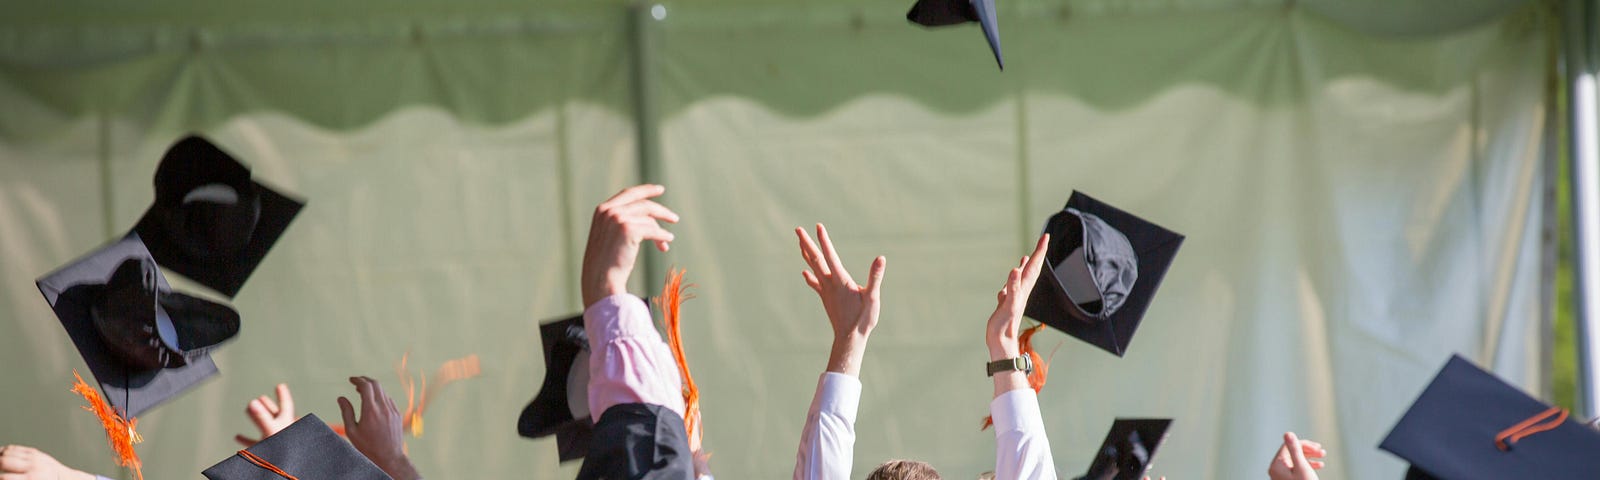 College students throwing their hats in the air at graduation